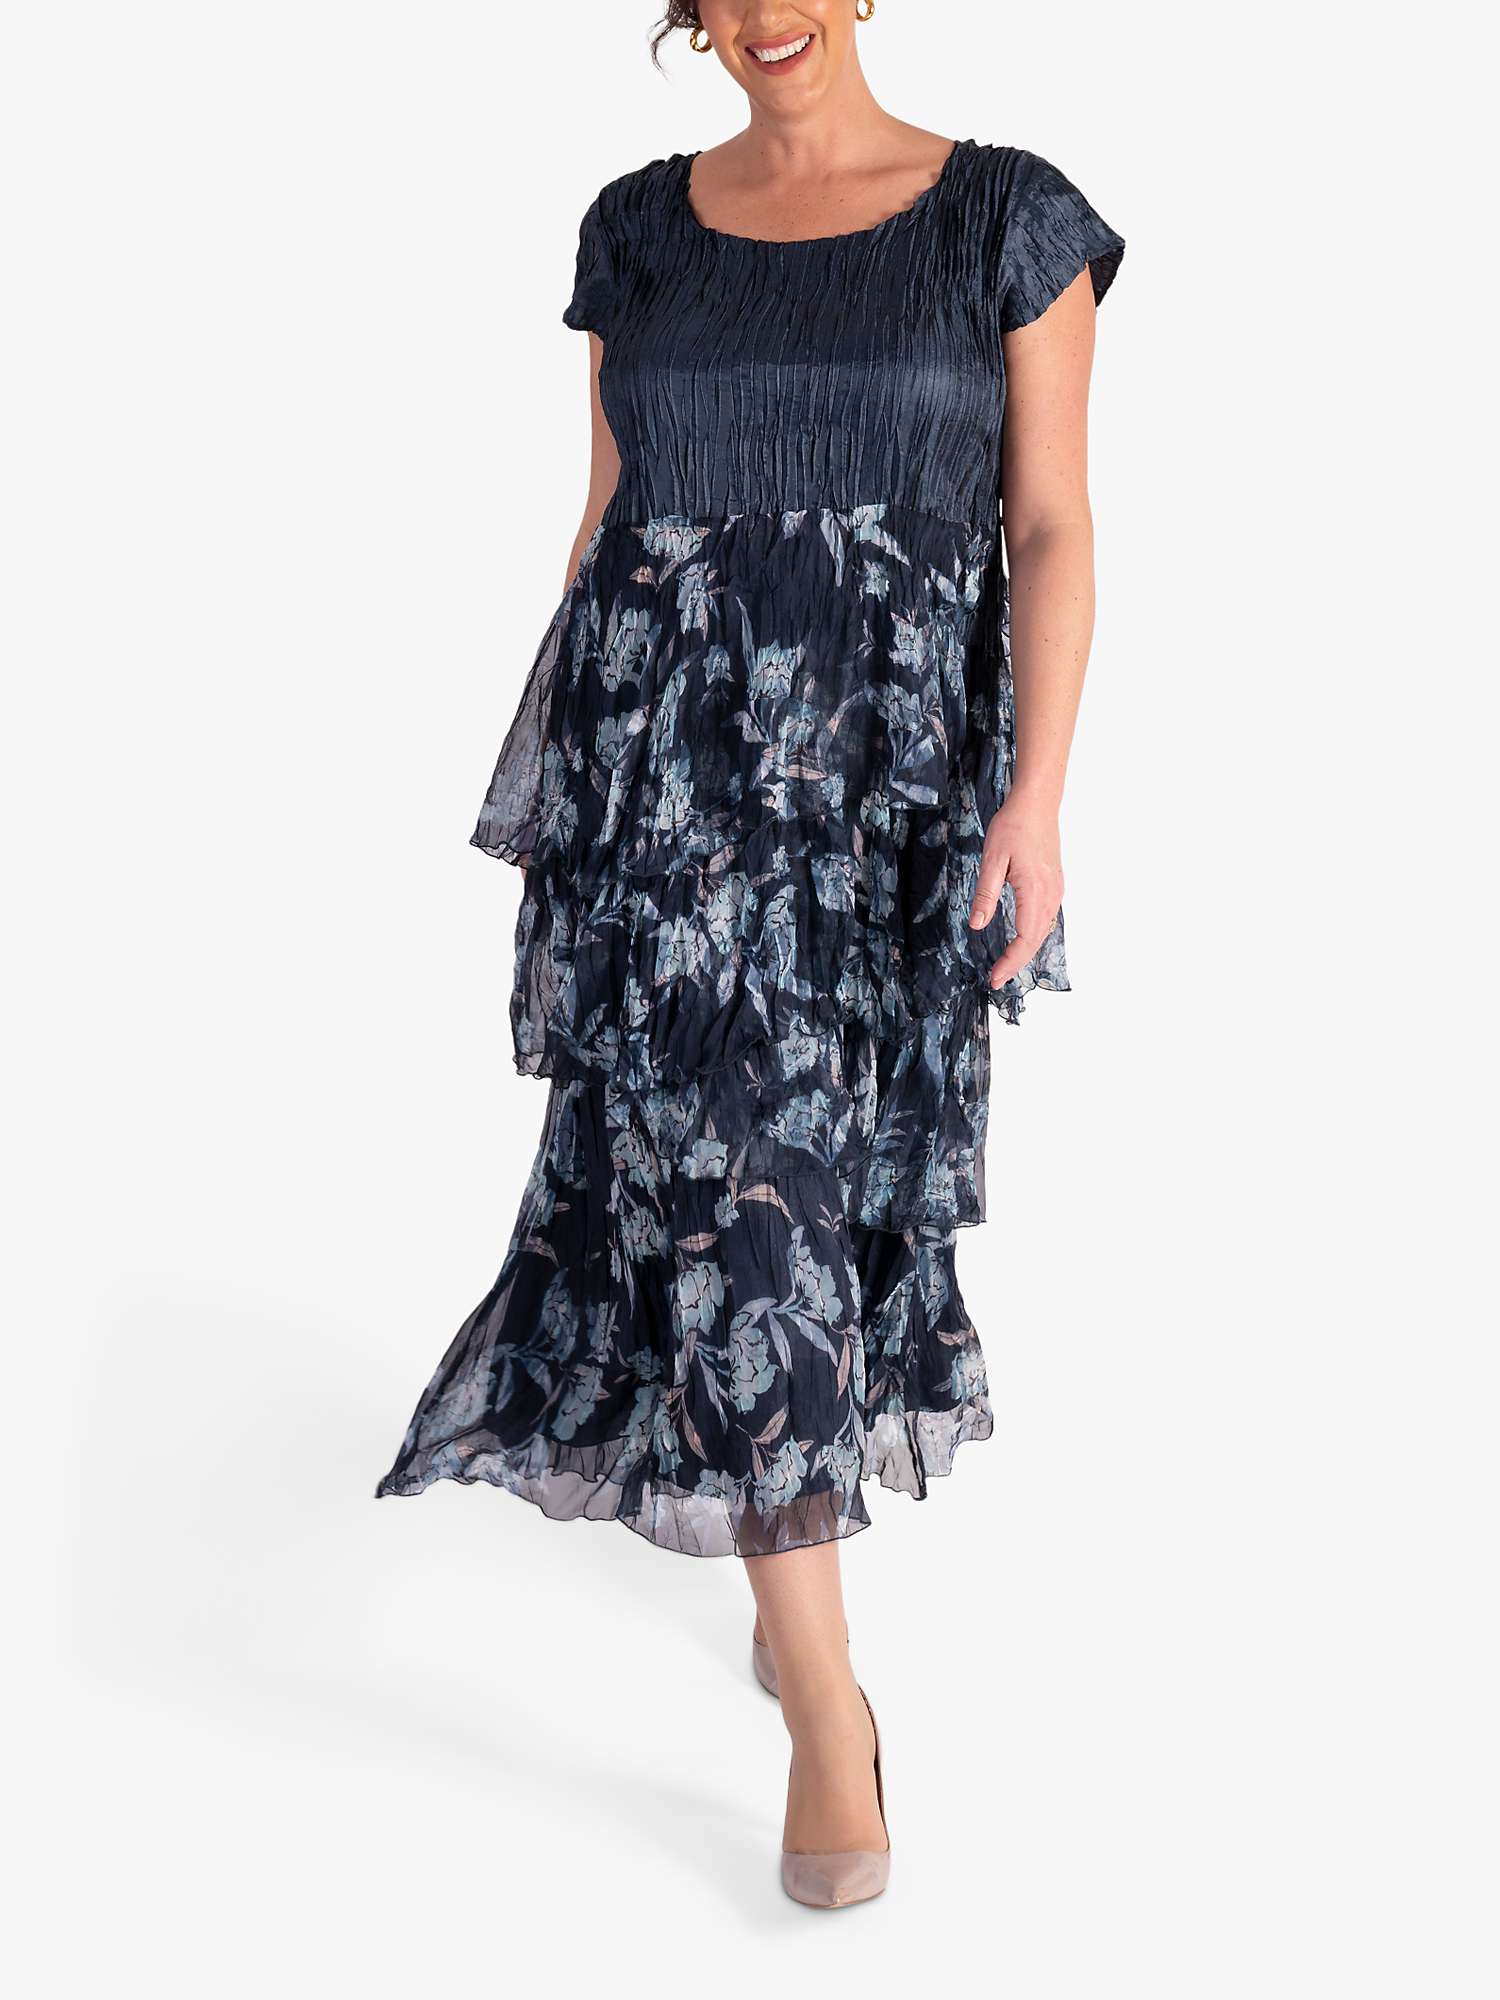 Buy chesca Floral Satin Chiffon Dress, Navy/Multi Online at johnlewis.com